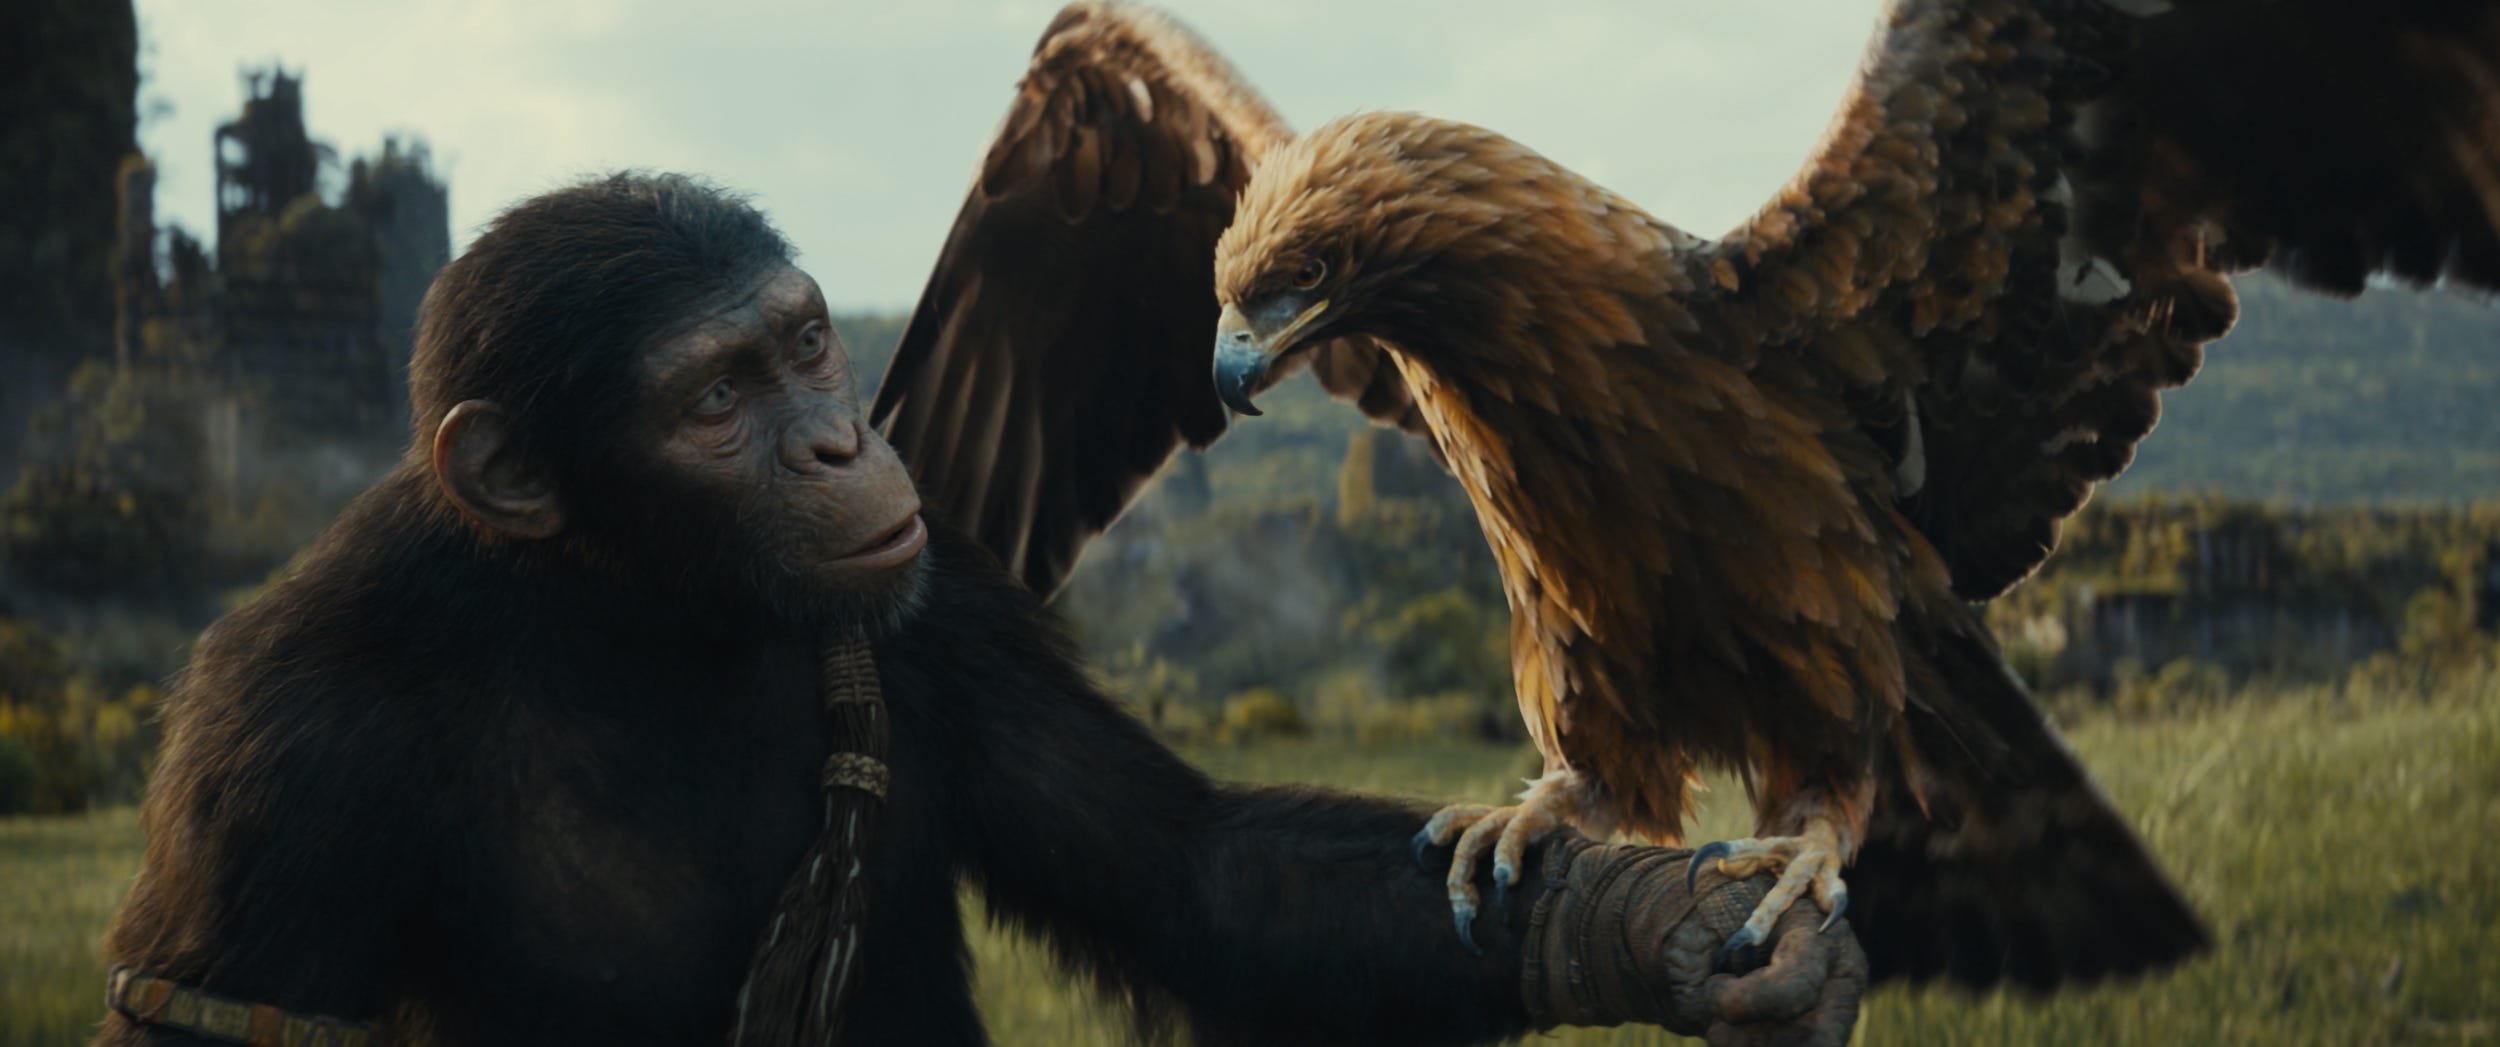 <p>Apes are now the dominant species on Earth while humans have regressed in the sequel to 2017's "War for the Planet of the Apes."</p><p>The fourth film in the franchise, from director Wes Ball ("The Maze Runner" trilogy), picks up under the tyrannical rule of a new ape leader, Proximus Caesar, as a young ape, Noa (Owen Teague), sets out on a journey that causes him to question everything he's believed.</p>